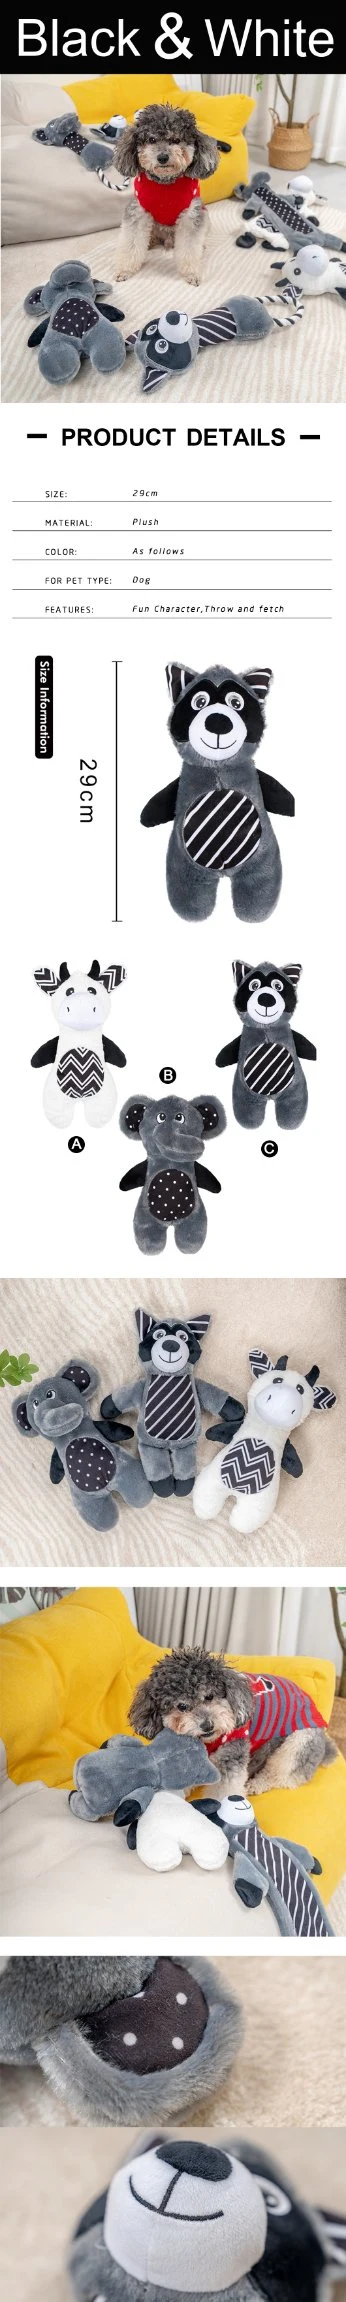 Rena Pet Black and White Animal Sound Paper Squeaker Stuffed Plush Classical Design Dog Toy